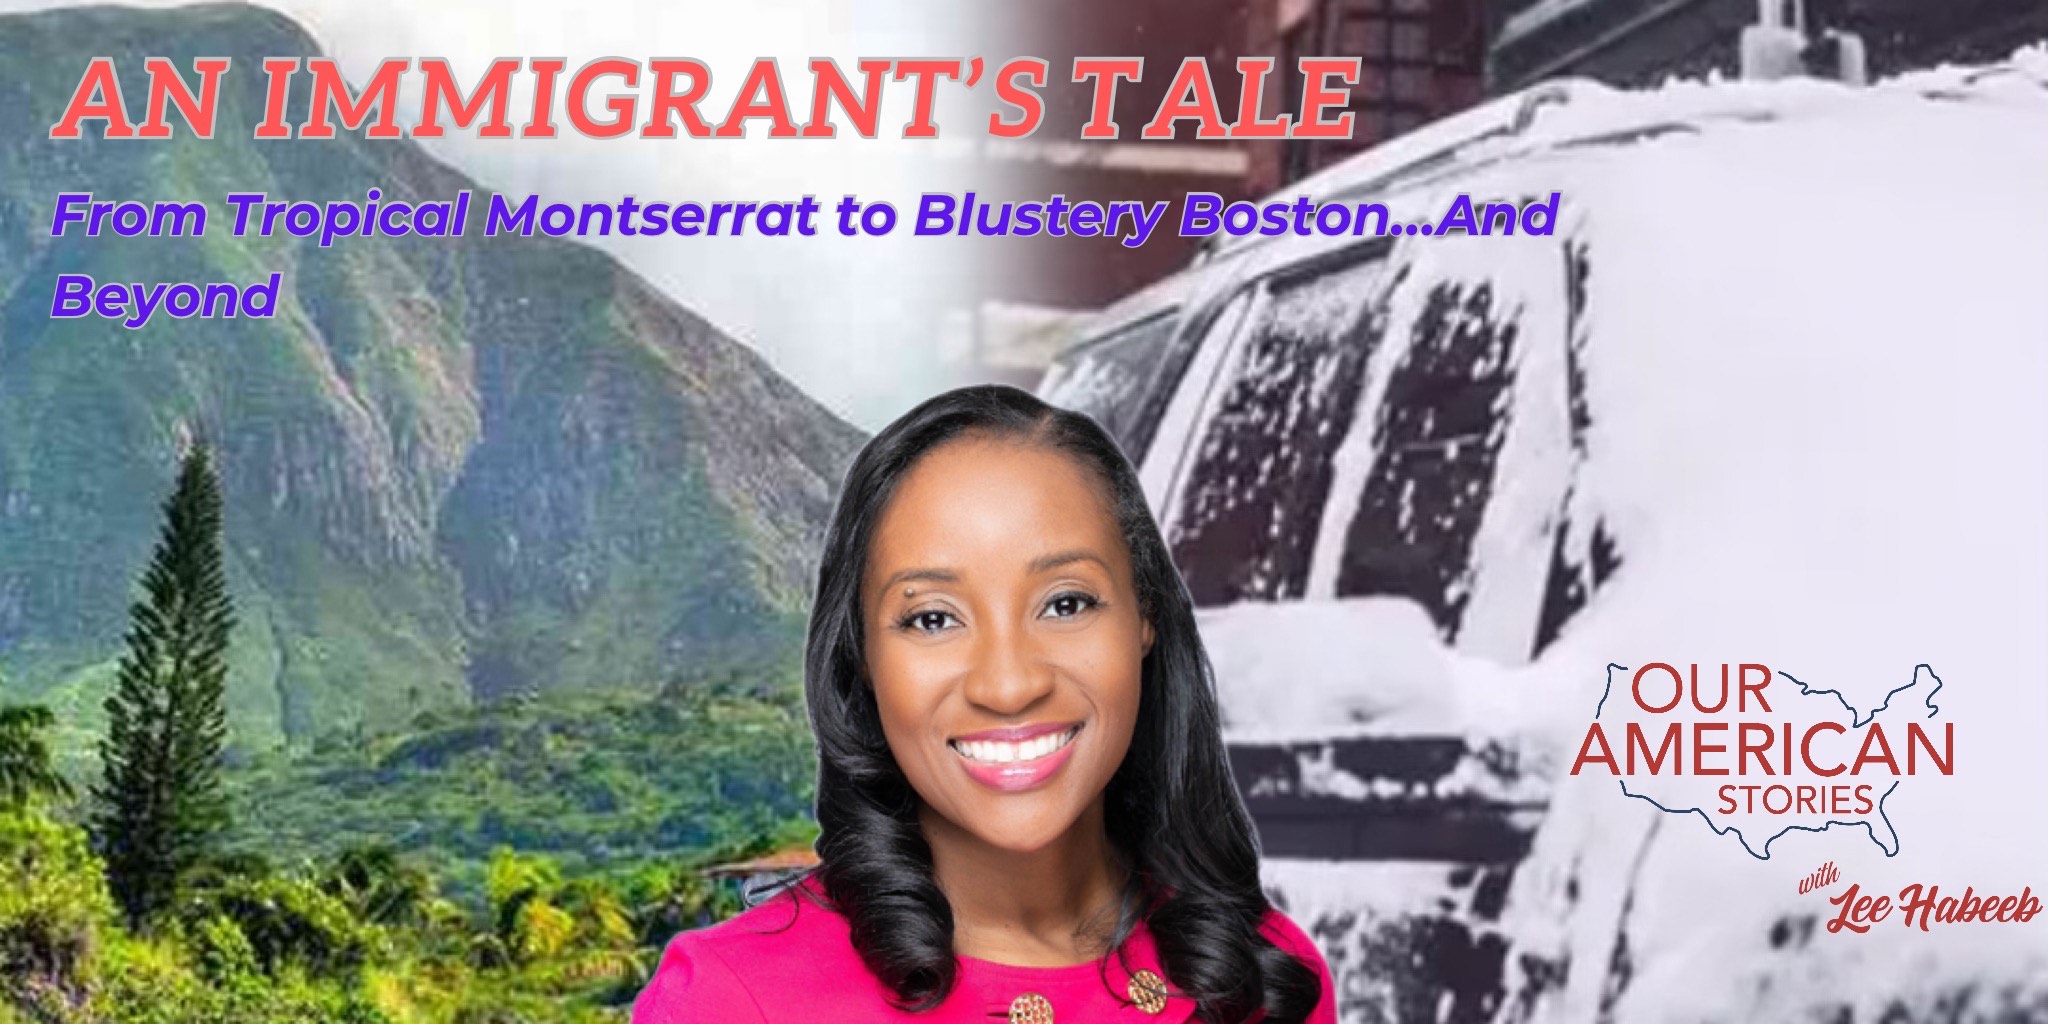 An Immigrant's Tale: From The Tropical Island of Montserrat to Blustery Boston and Beyond